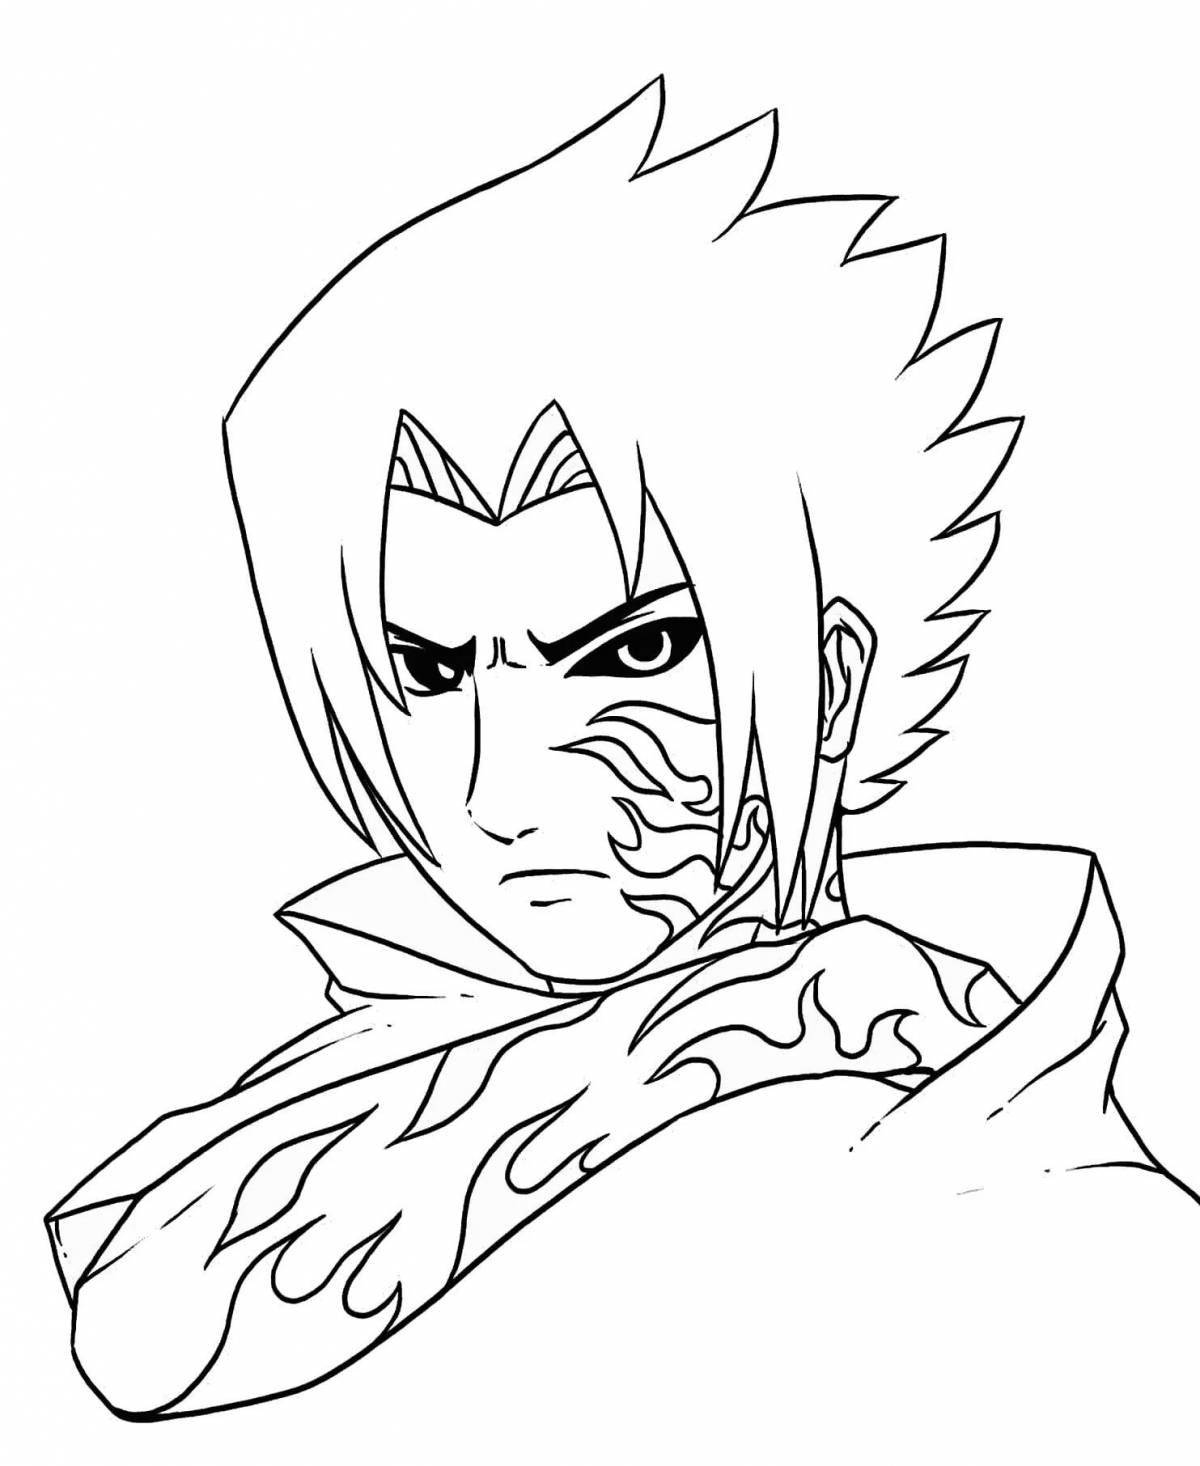 Colorfully colored naruto and sasuke coloring pages